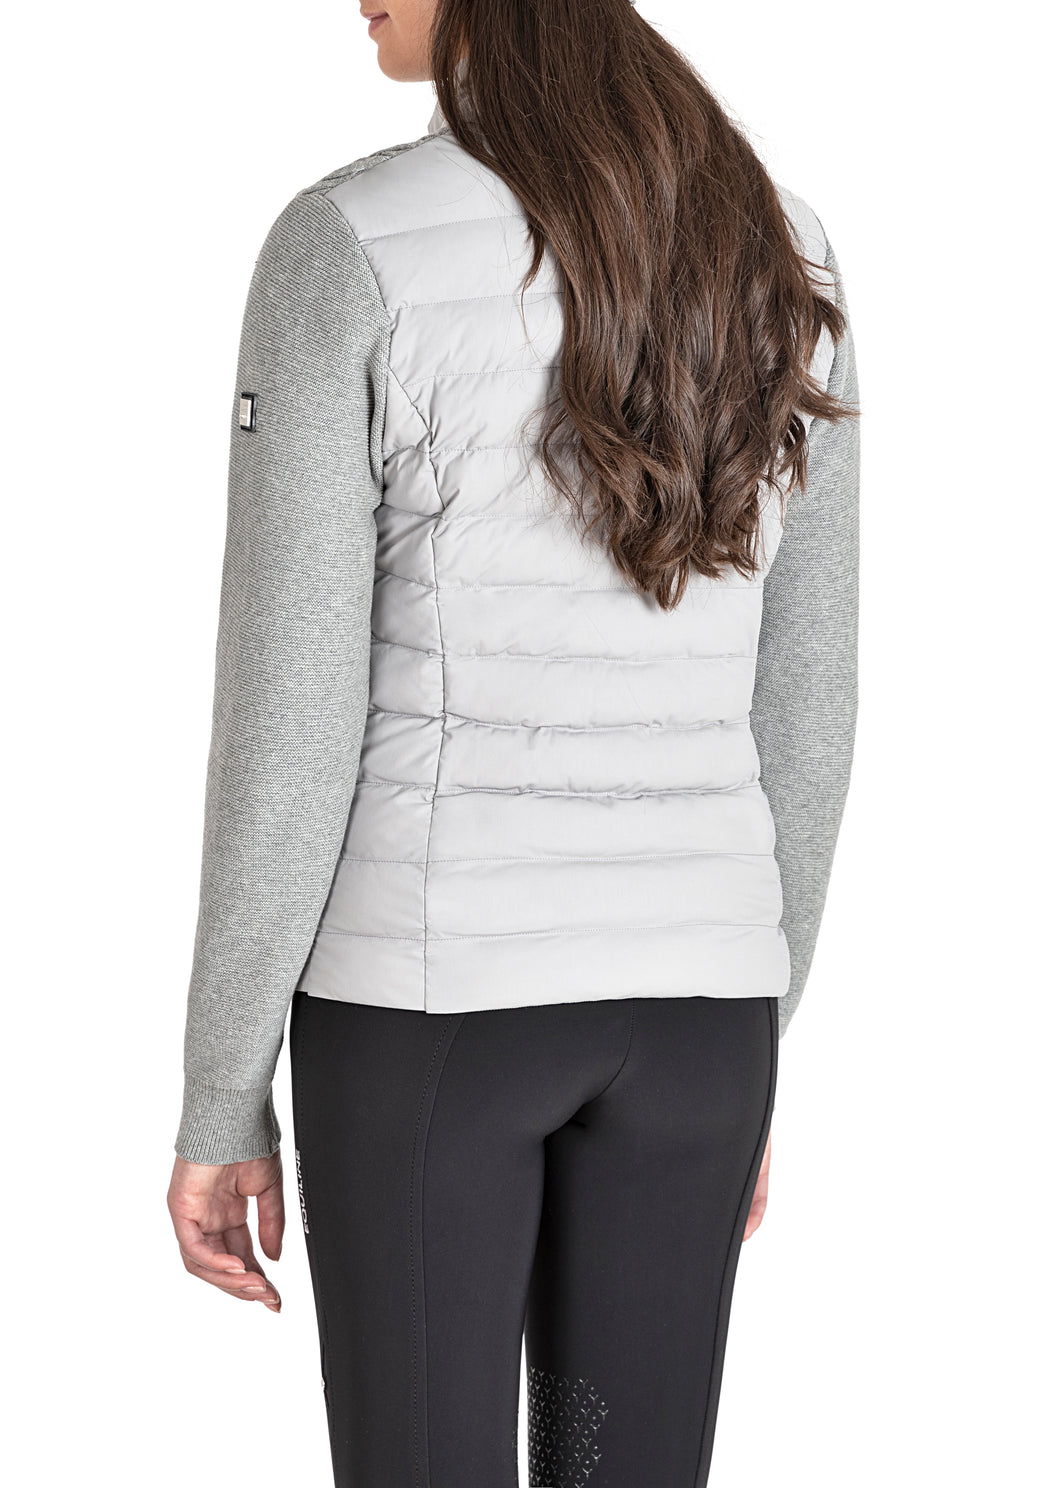 Equiline Women's Softshell Knit Sleeve Emaie